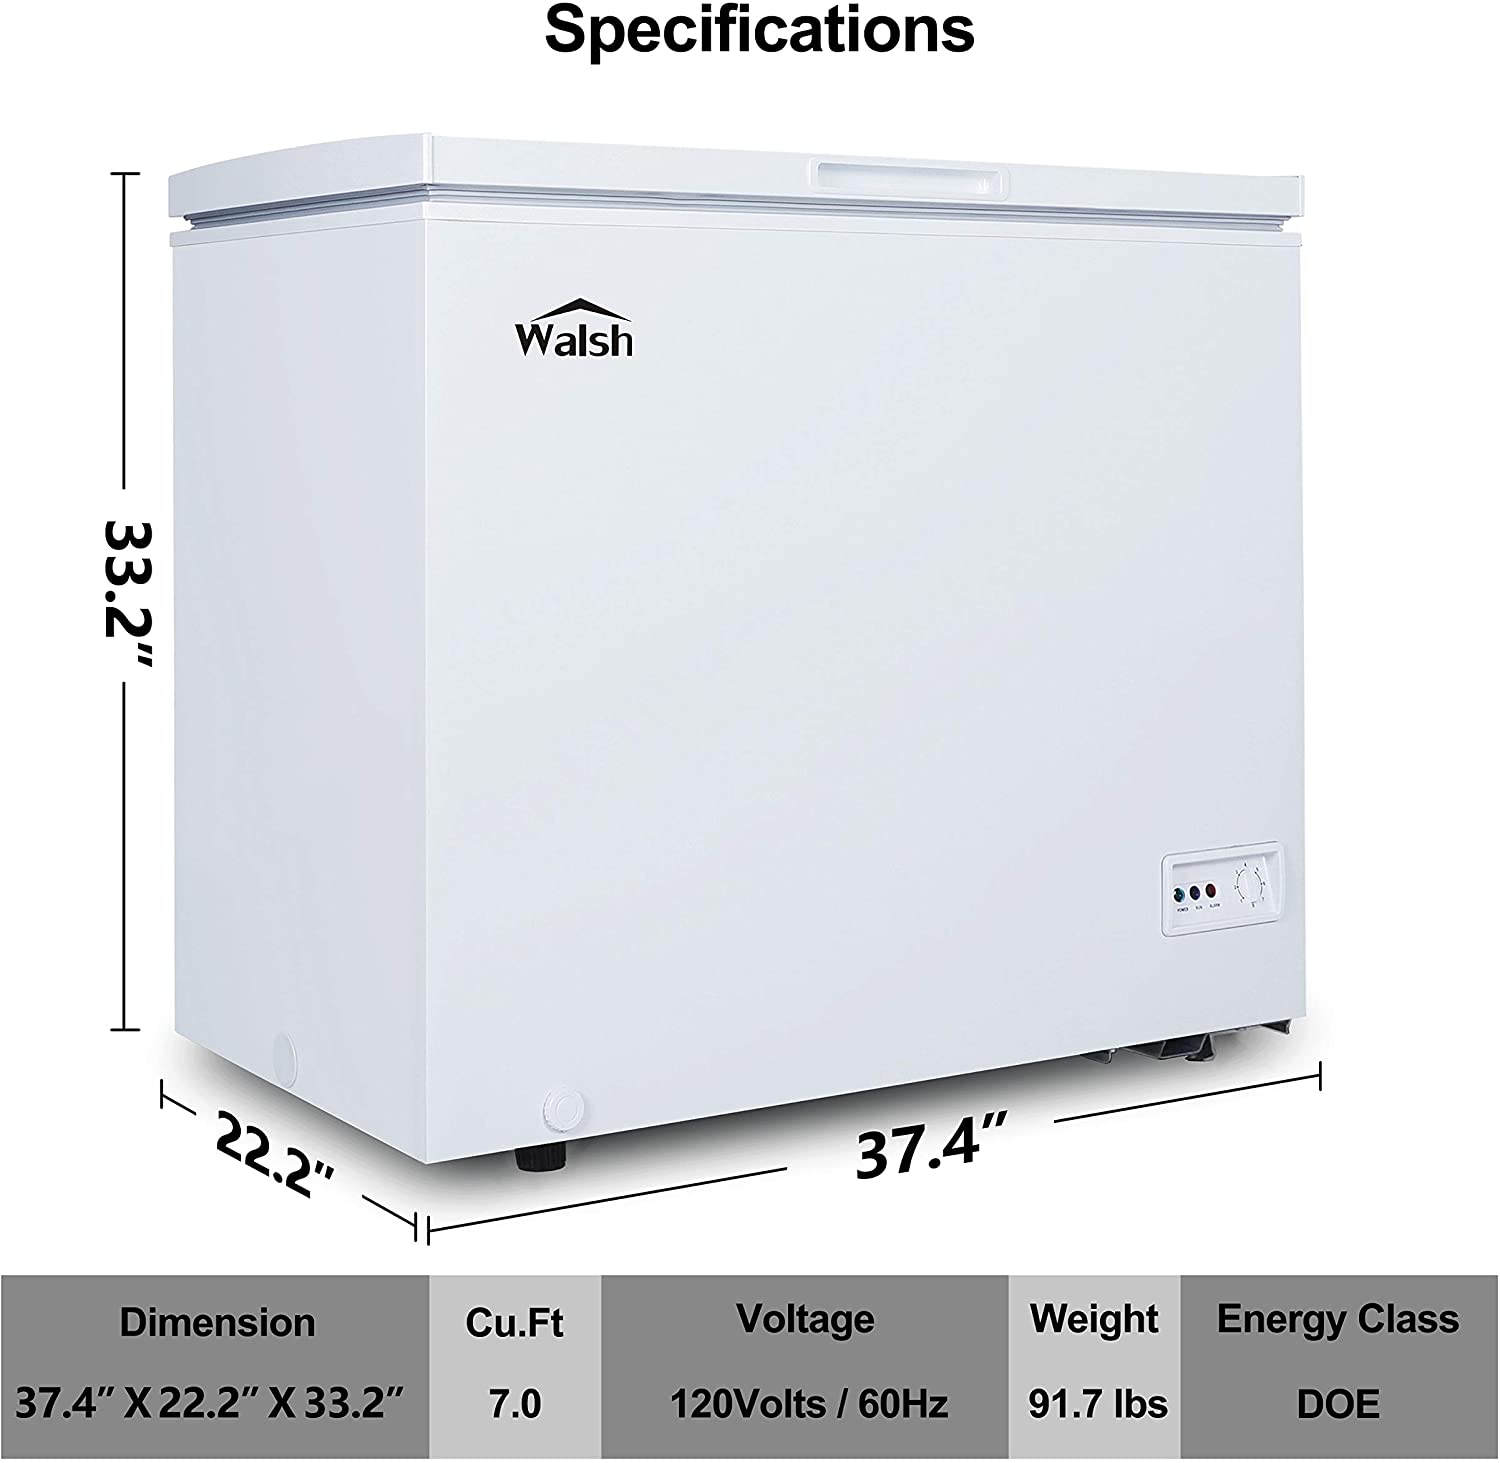 WALSH WSF70CWED01 Manual Defrost Deep Chest Freezer, Specs